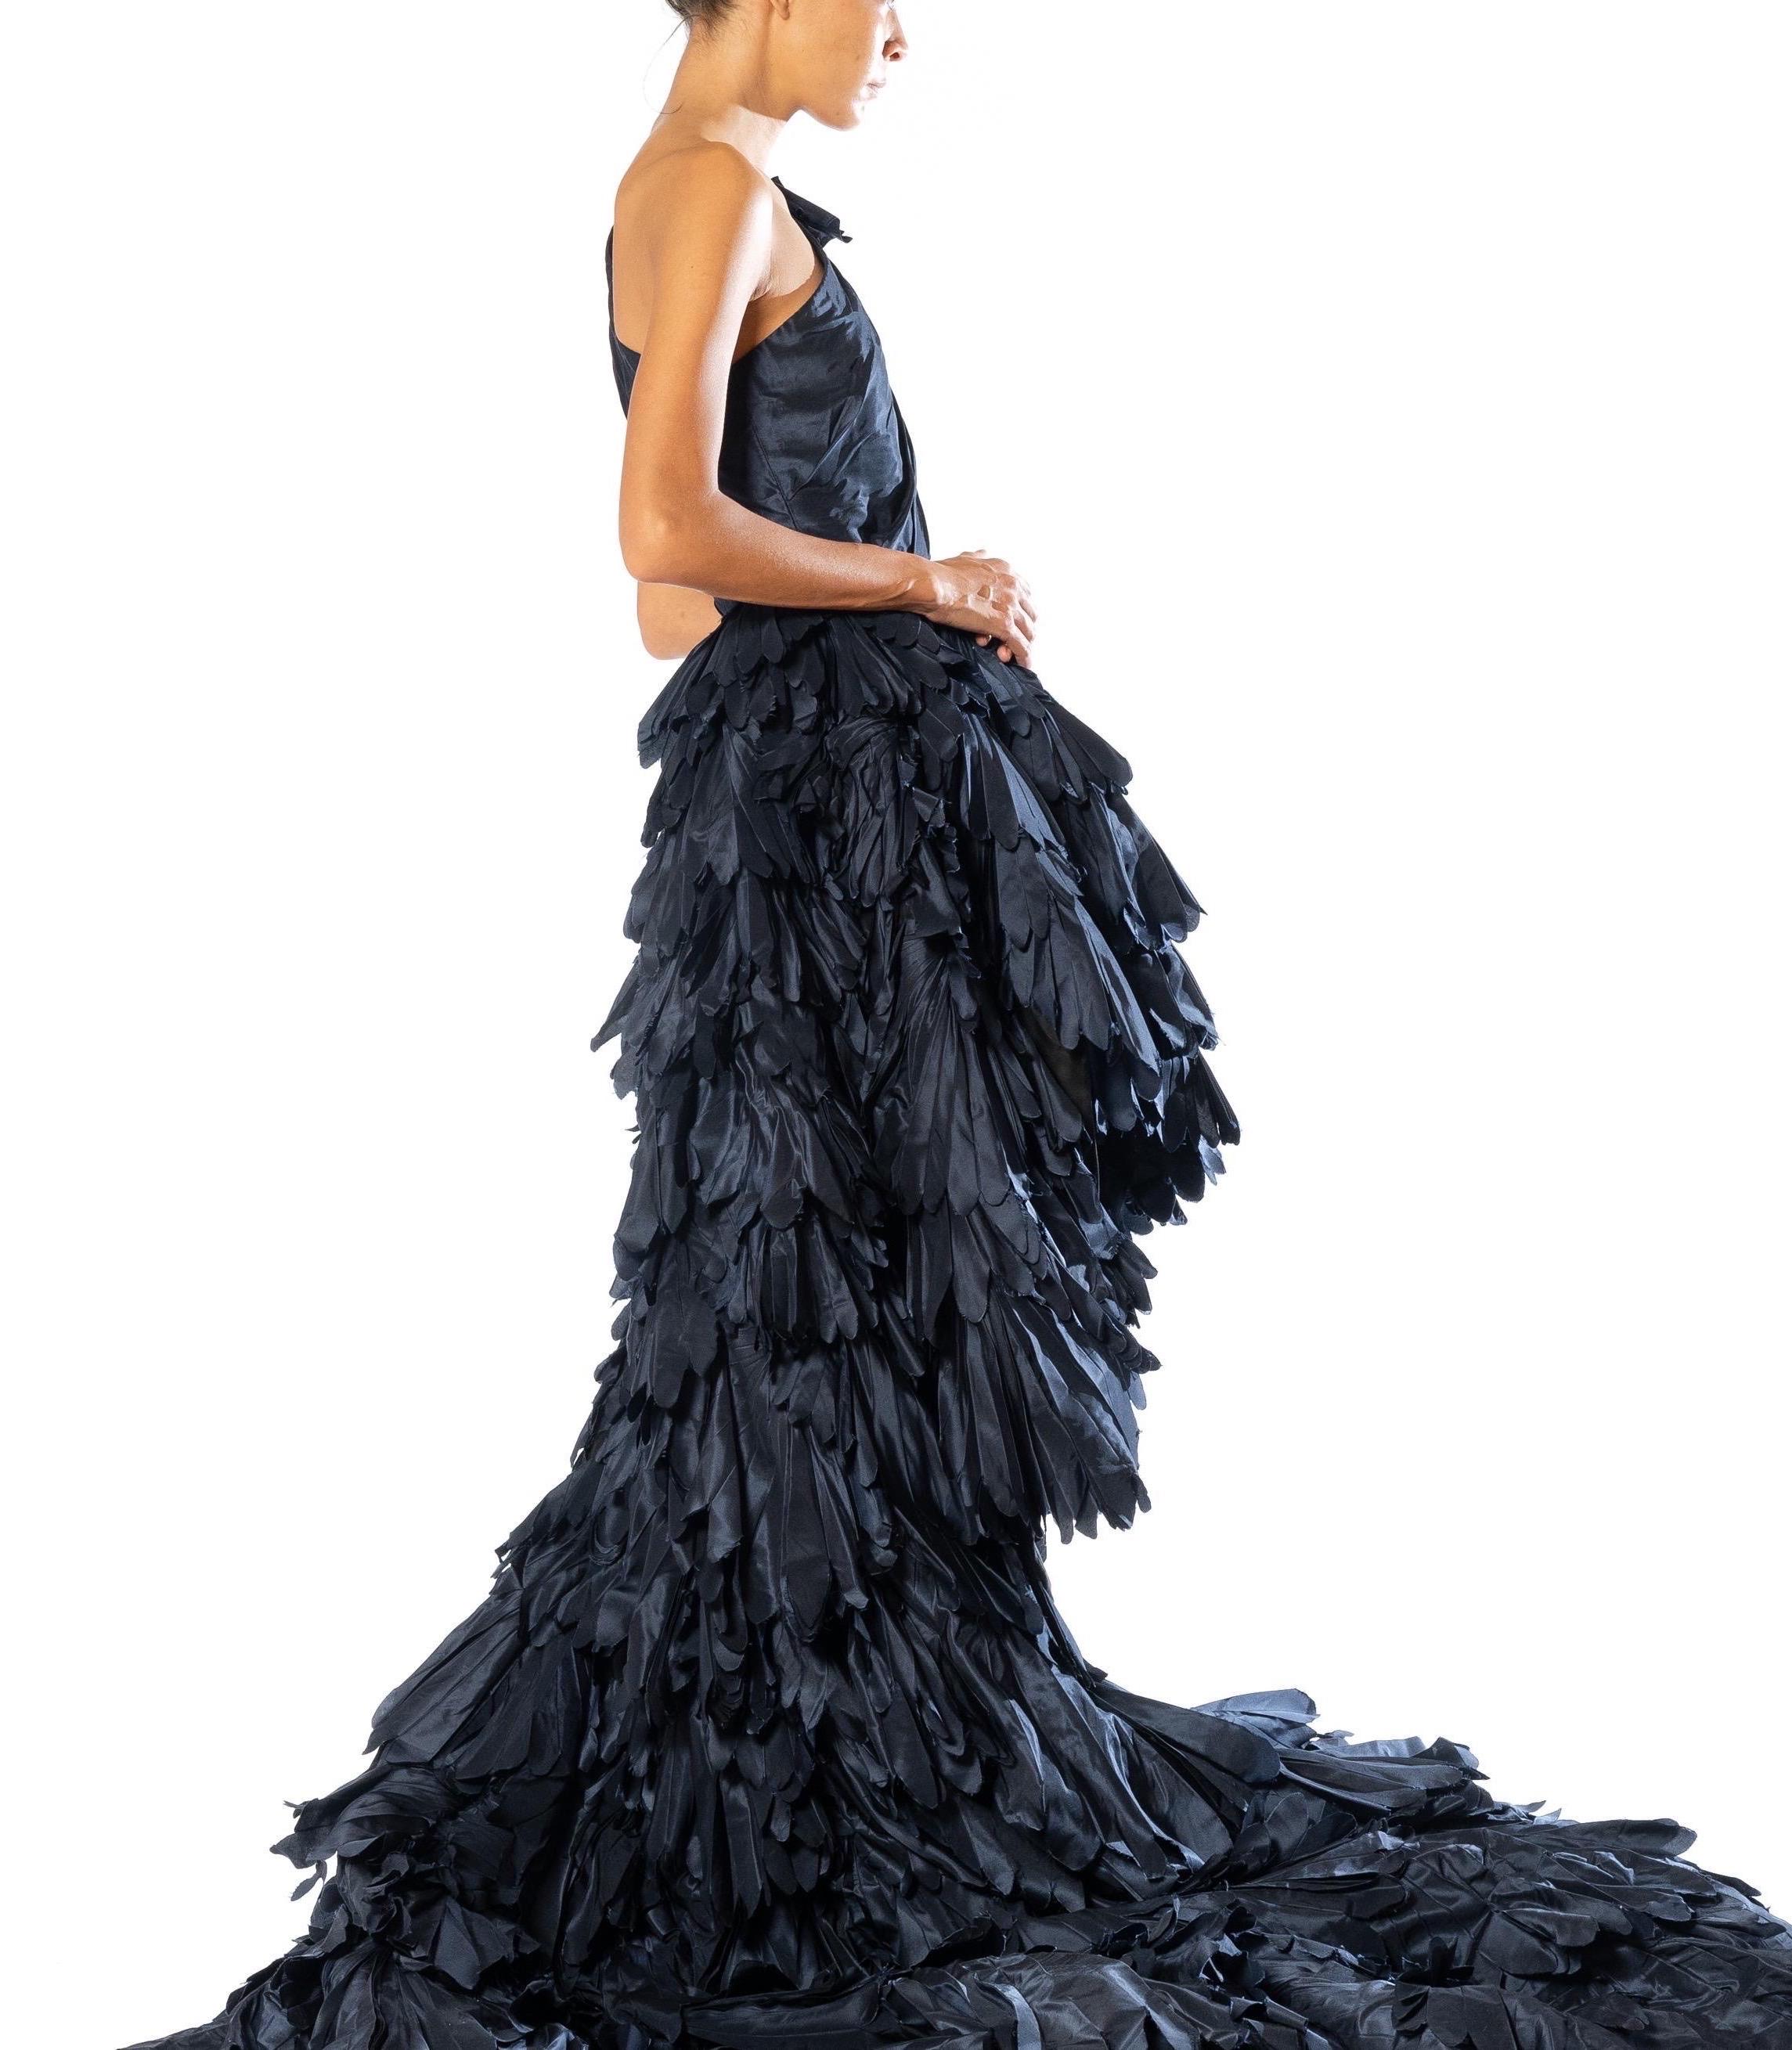 2000S Navy Blue Dramatic Silk Taffeta Trained Gown Covered In Pleated Ruffles For Sale 7